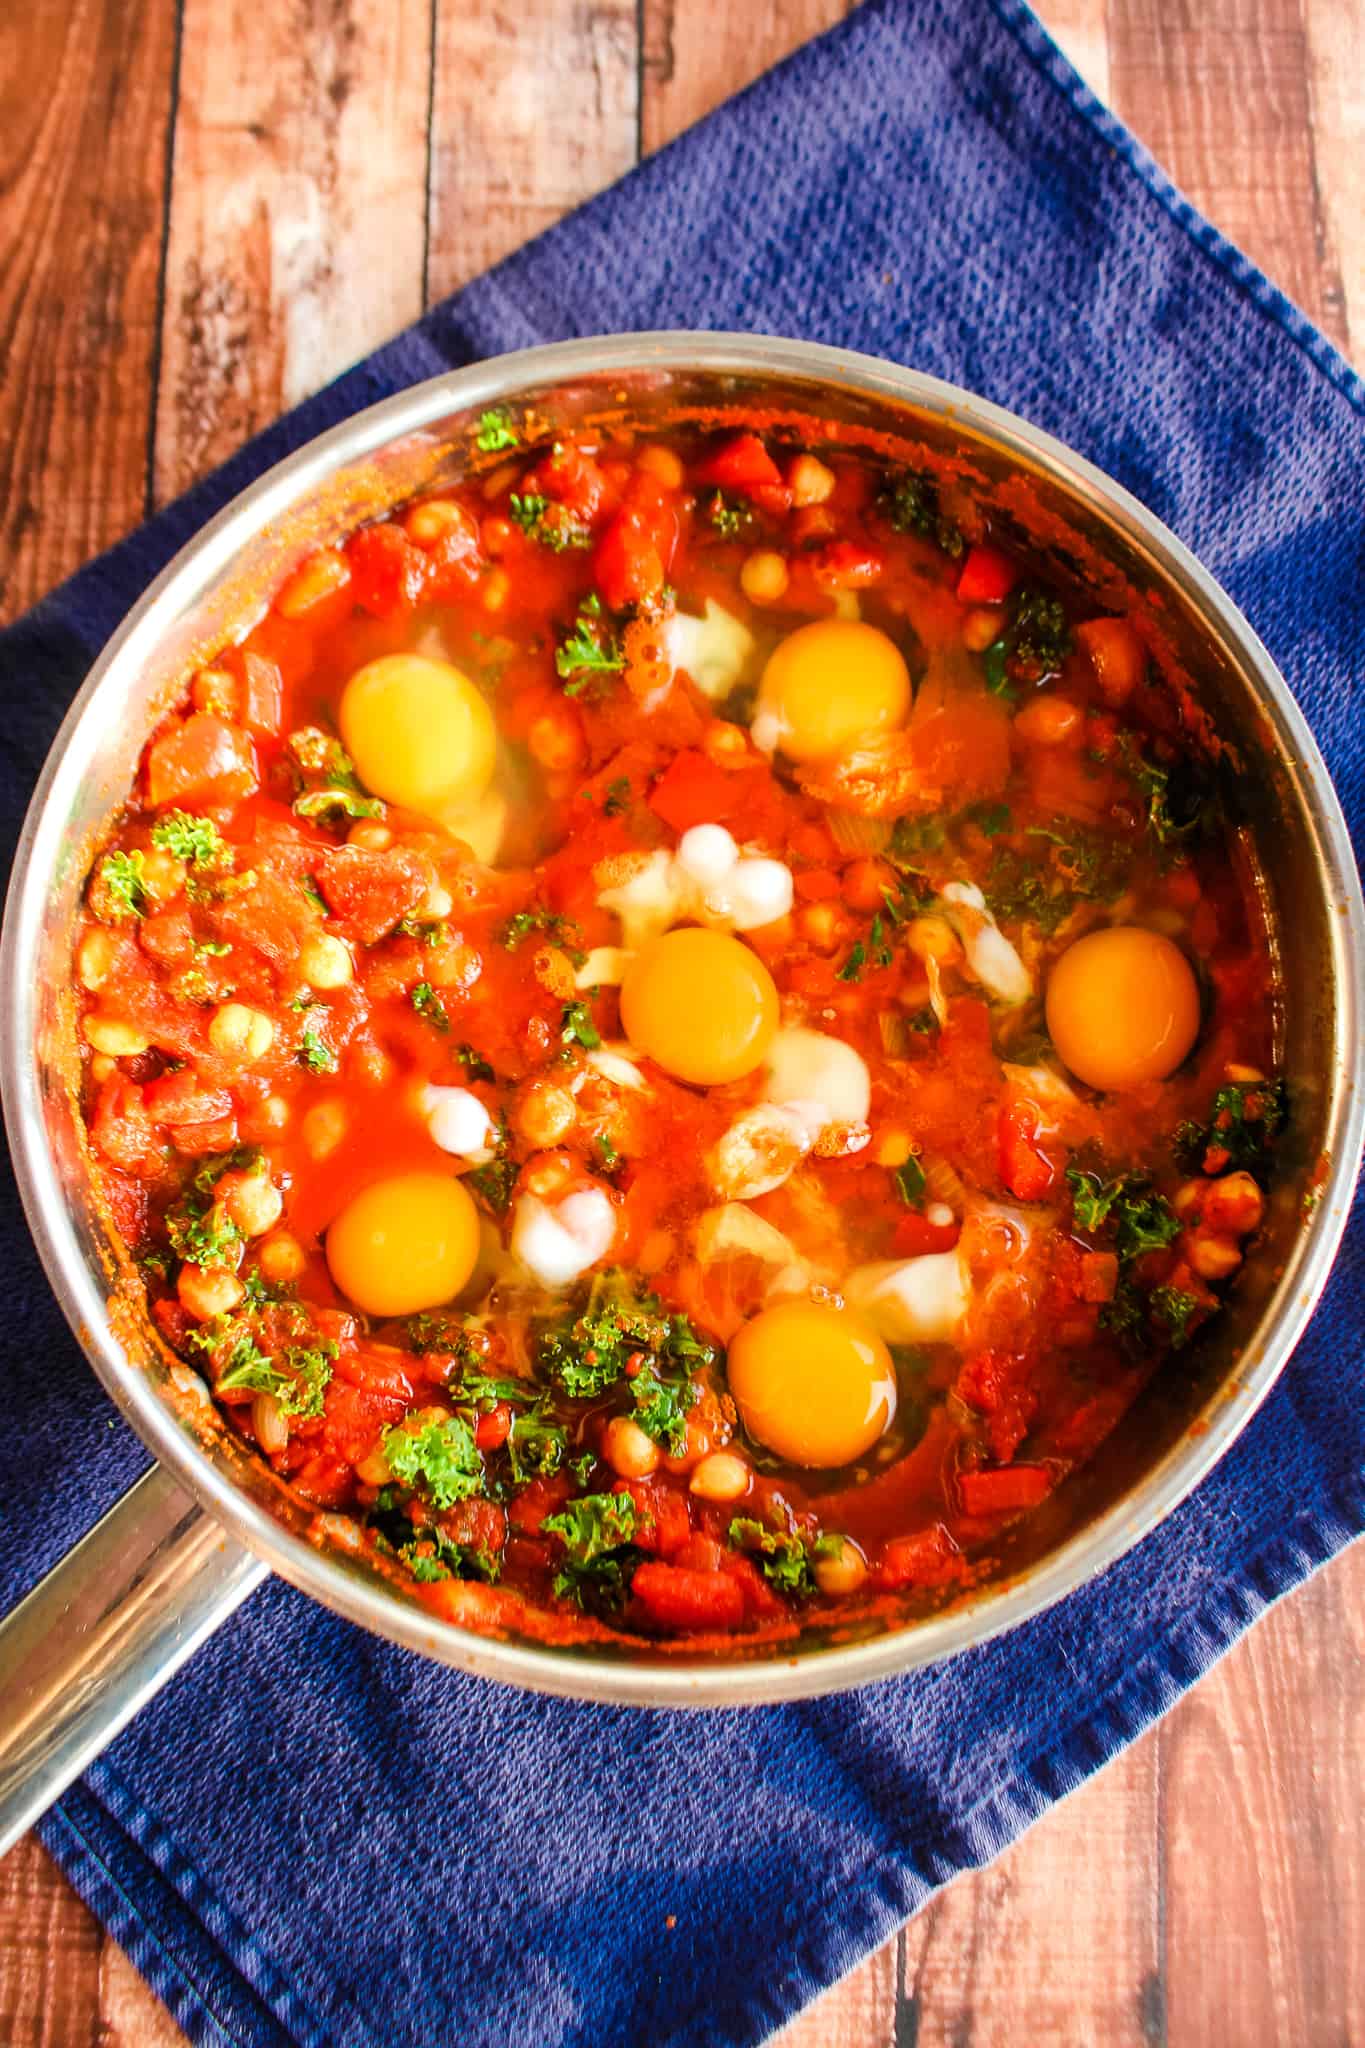 6 raw eggs added to skillet with hot shakshuka sauce. 